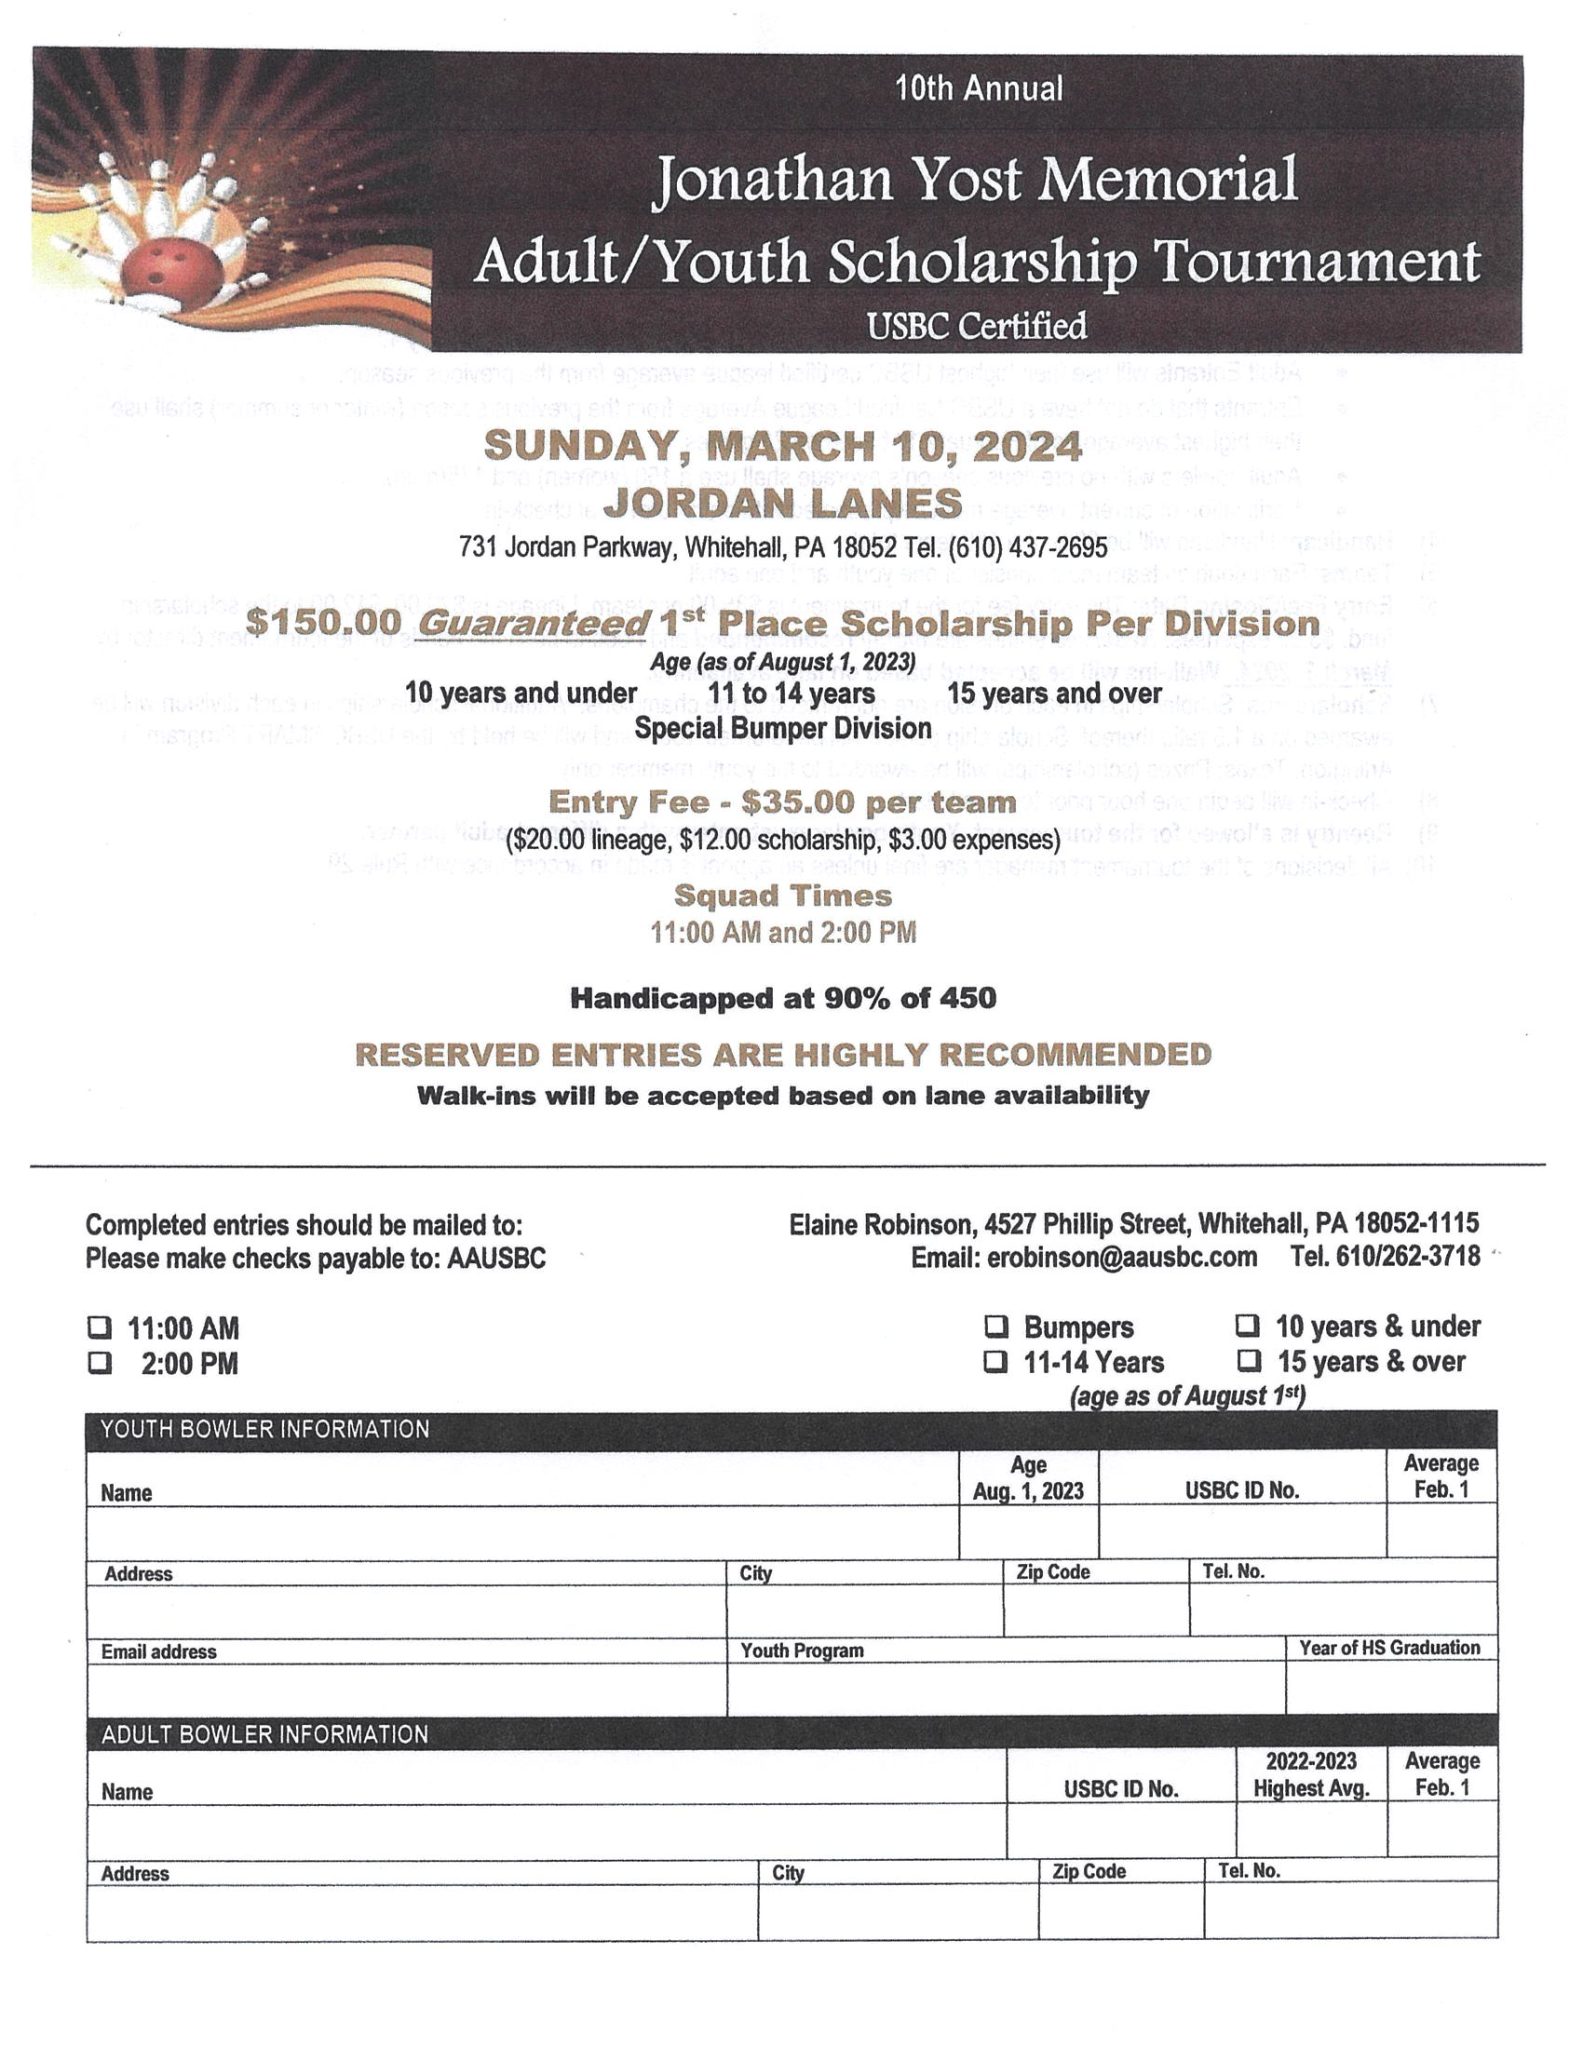 10th Annual Jonathan Yost Memorial Adult / Youth Scholarship Tournament 5